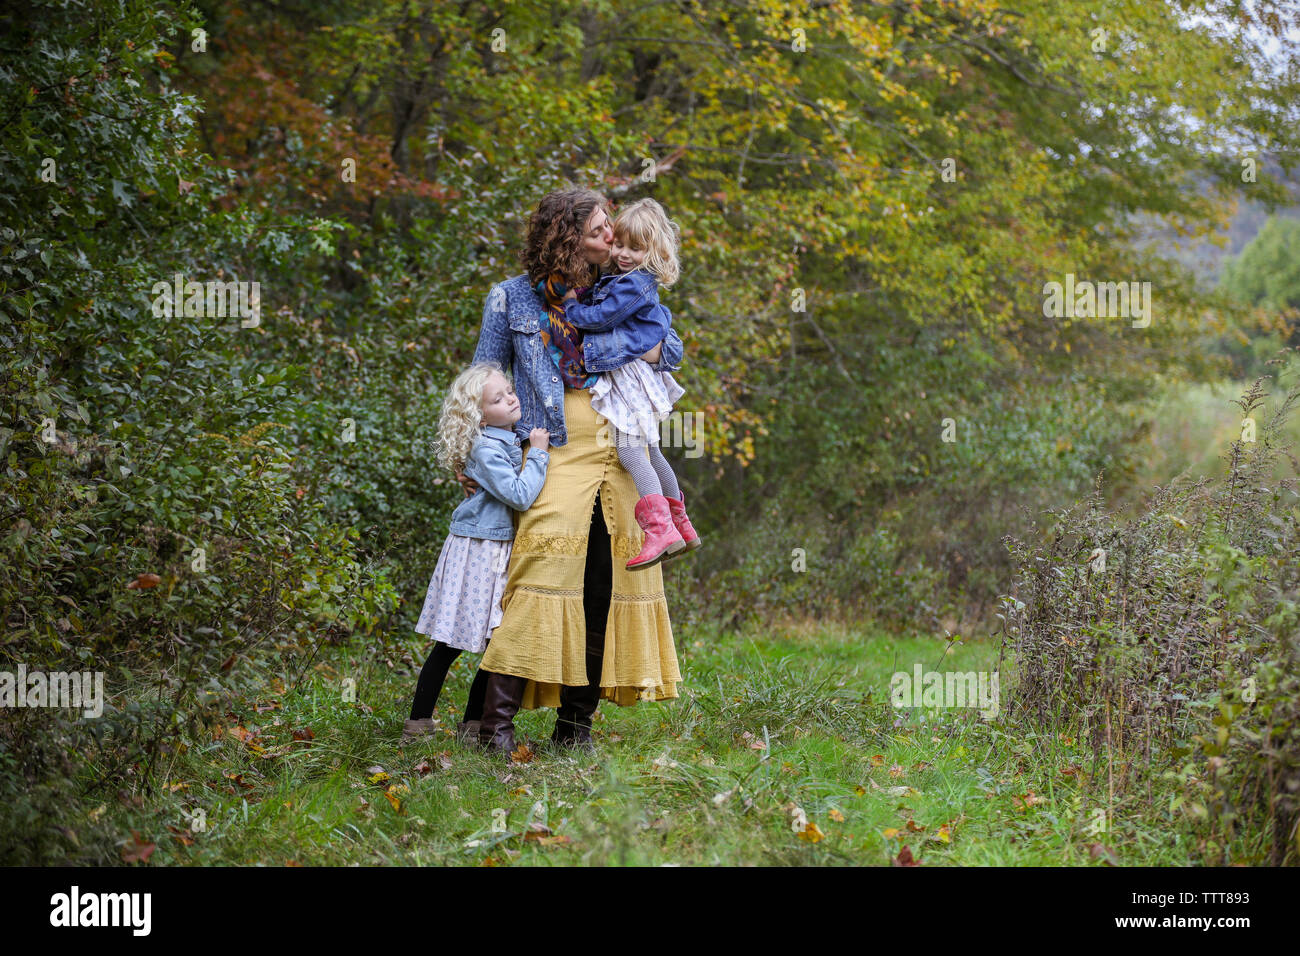 mother with two children standing together kissing child on cheek Stock Photo